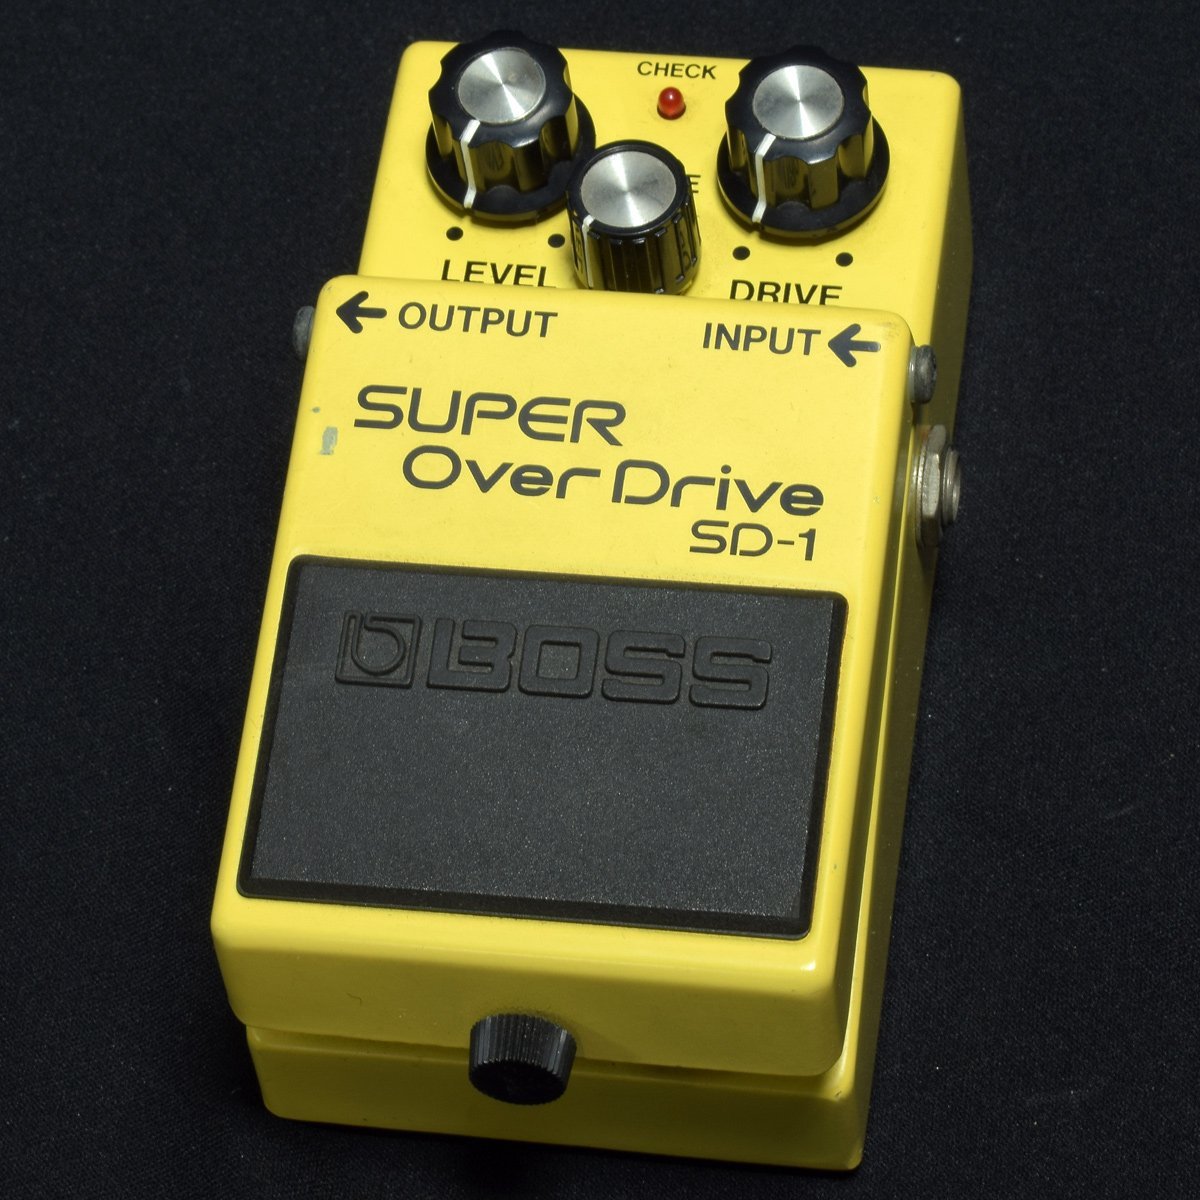 SD-1W(J) MADE IN JAPAN SUPER OverDrive …